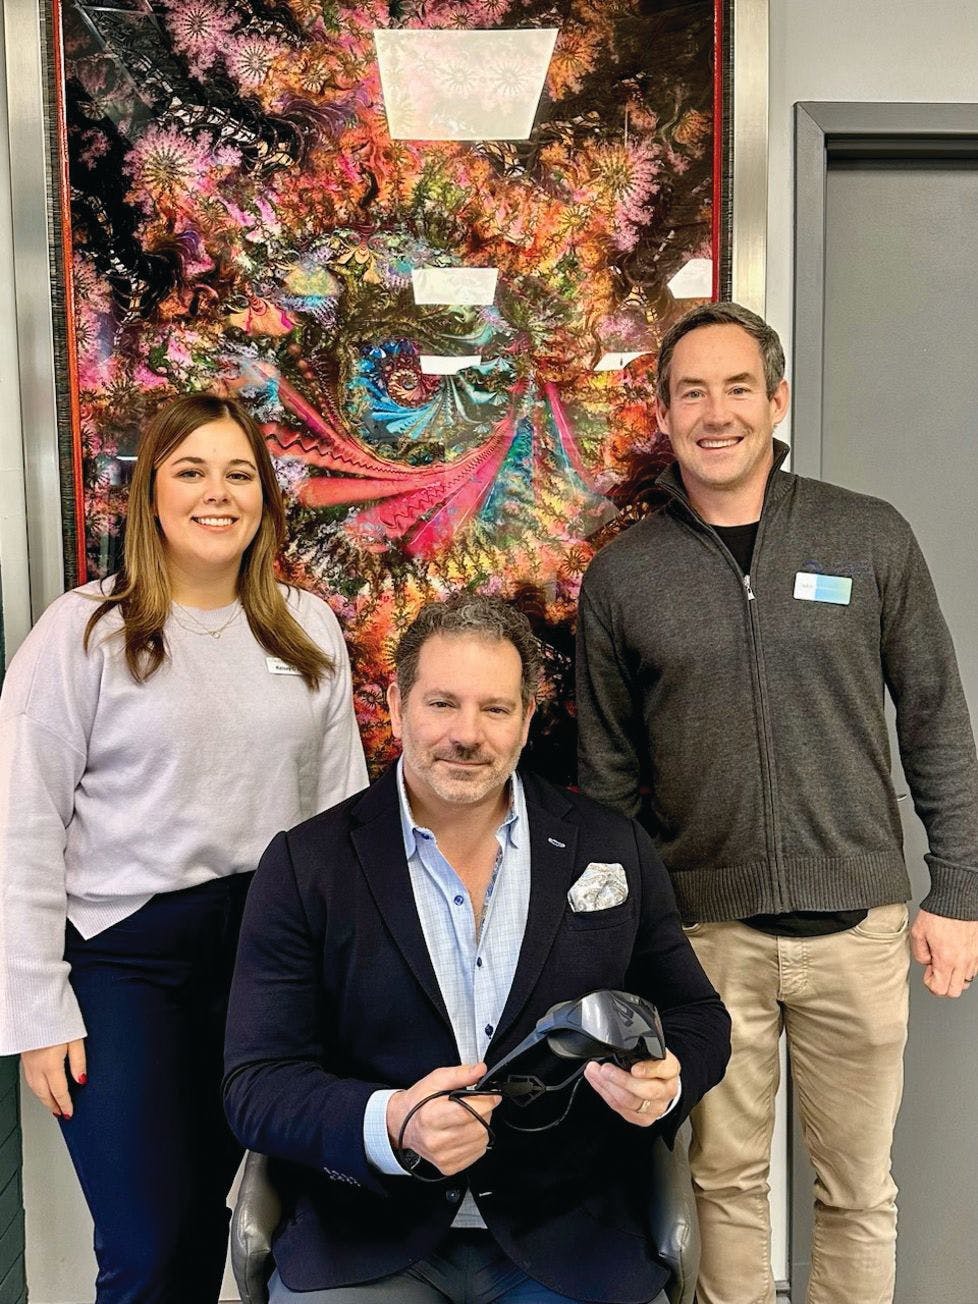 Steve R. Sarkisian Jr, MD (center), and Kelsey O’Neil, diagnostics regional business manager, South, at Glaukos Corporation, after a successful implementation visit with Brian Murphey, global vice president of sales, Radius XR.